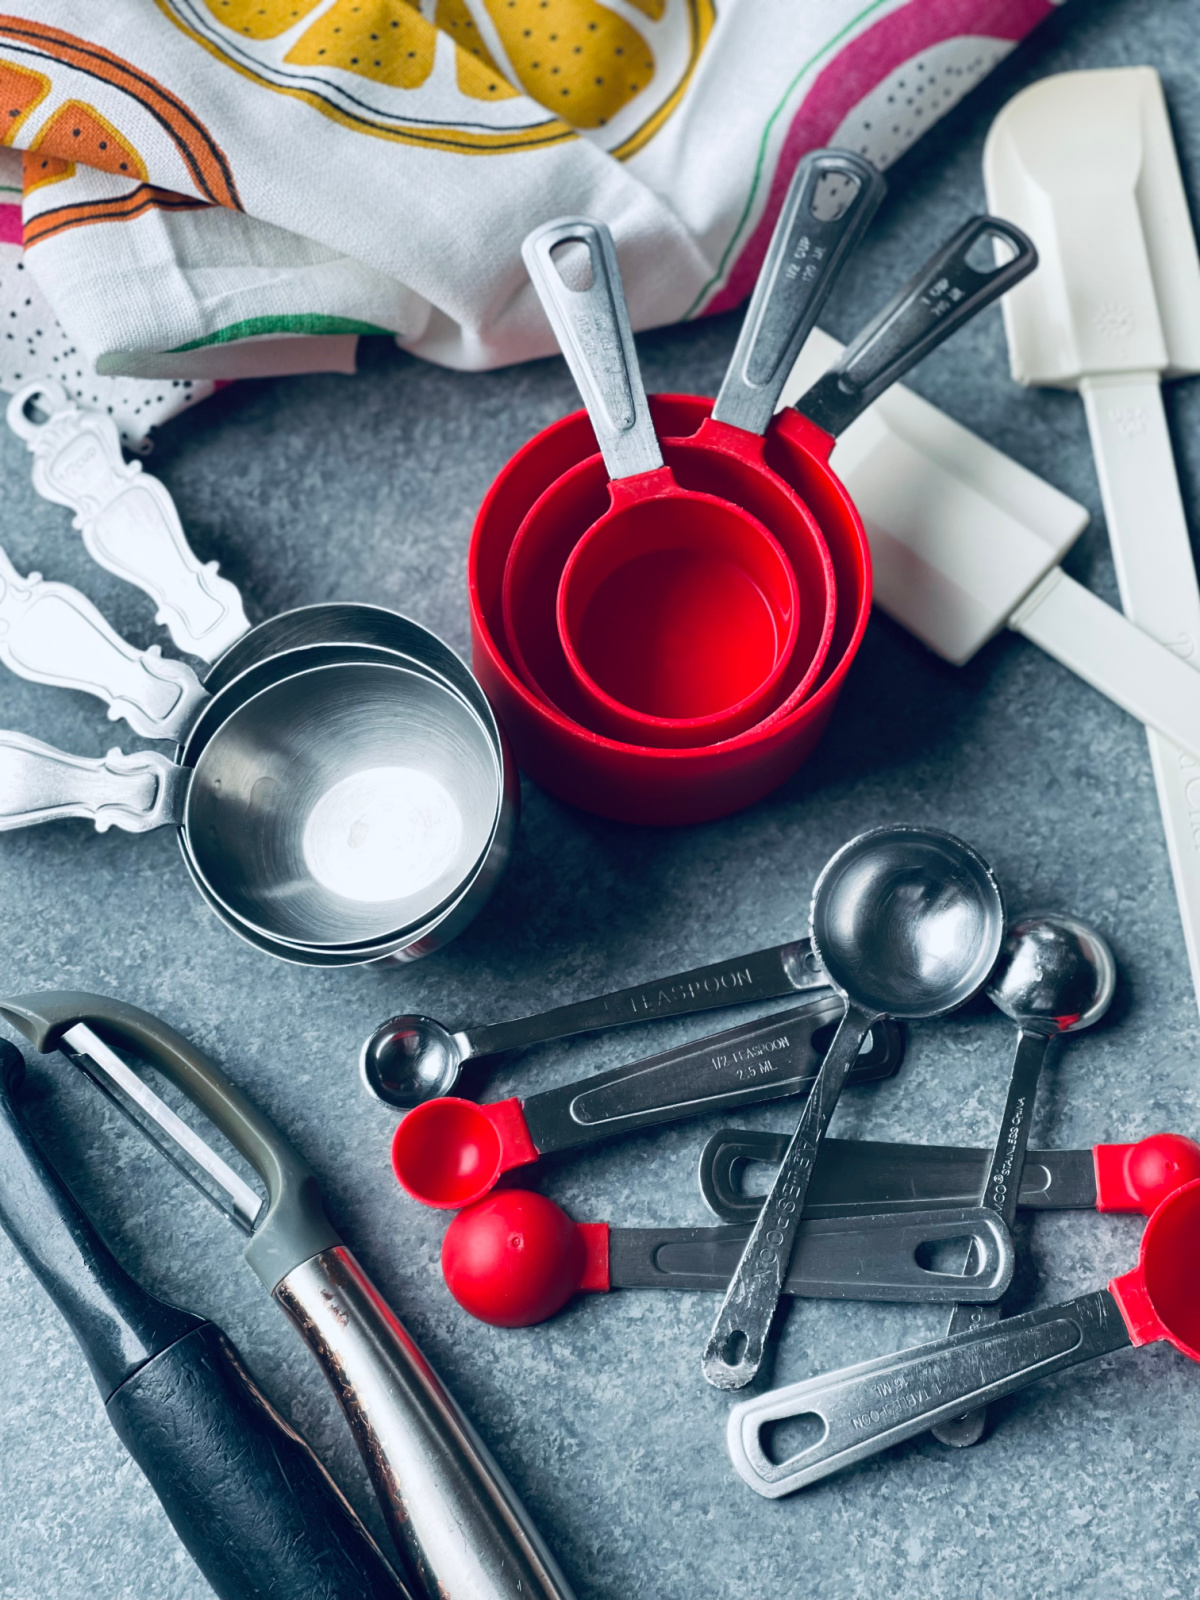 baking utensils and measuring cups and spoons spread out, duplicates of everything